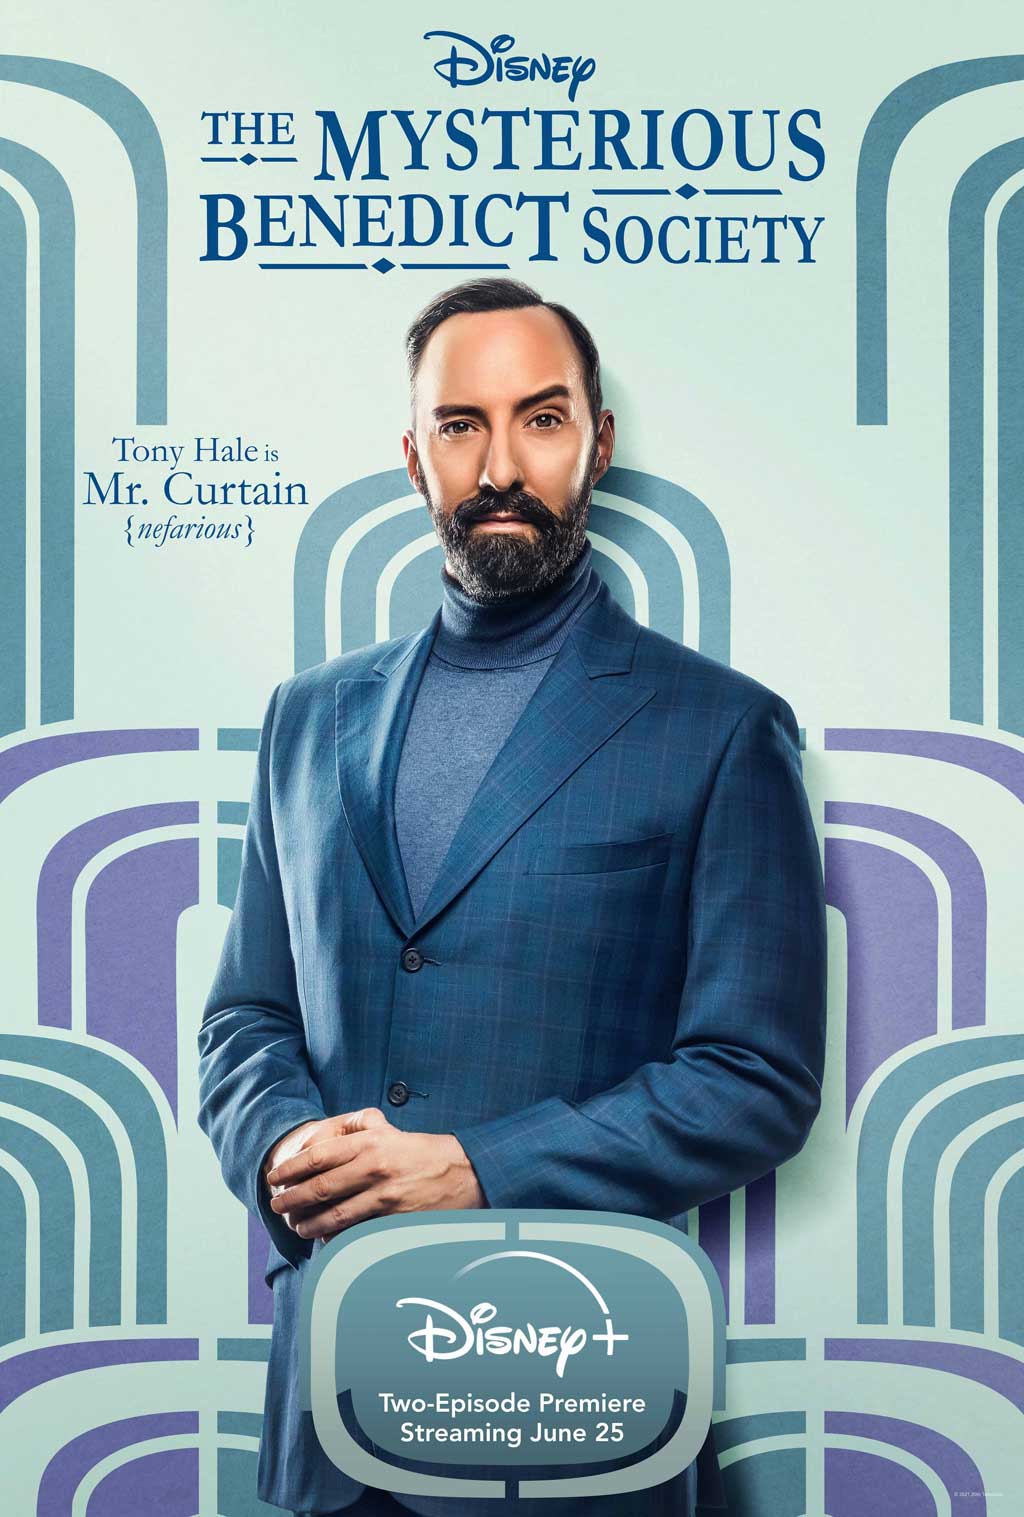 The Mysterious Benedict Society - Tony Hale's Dual Role Posters & Video